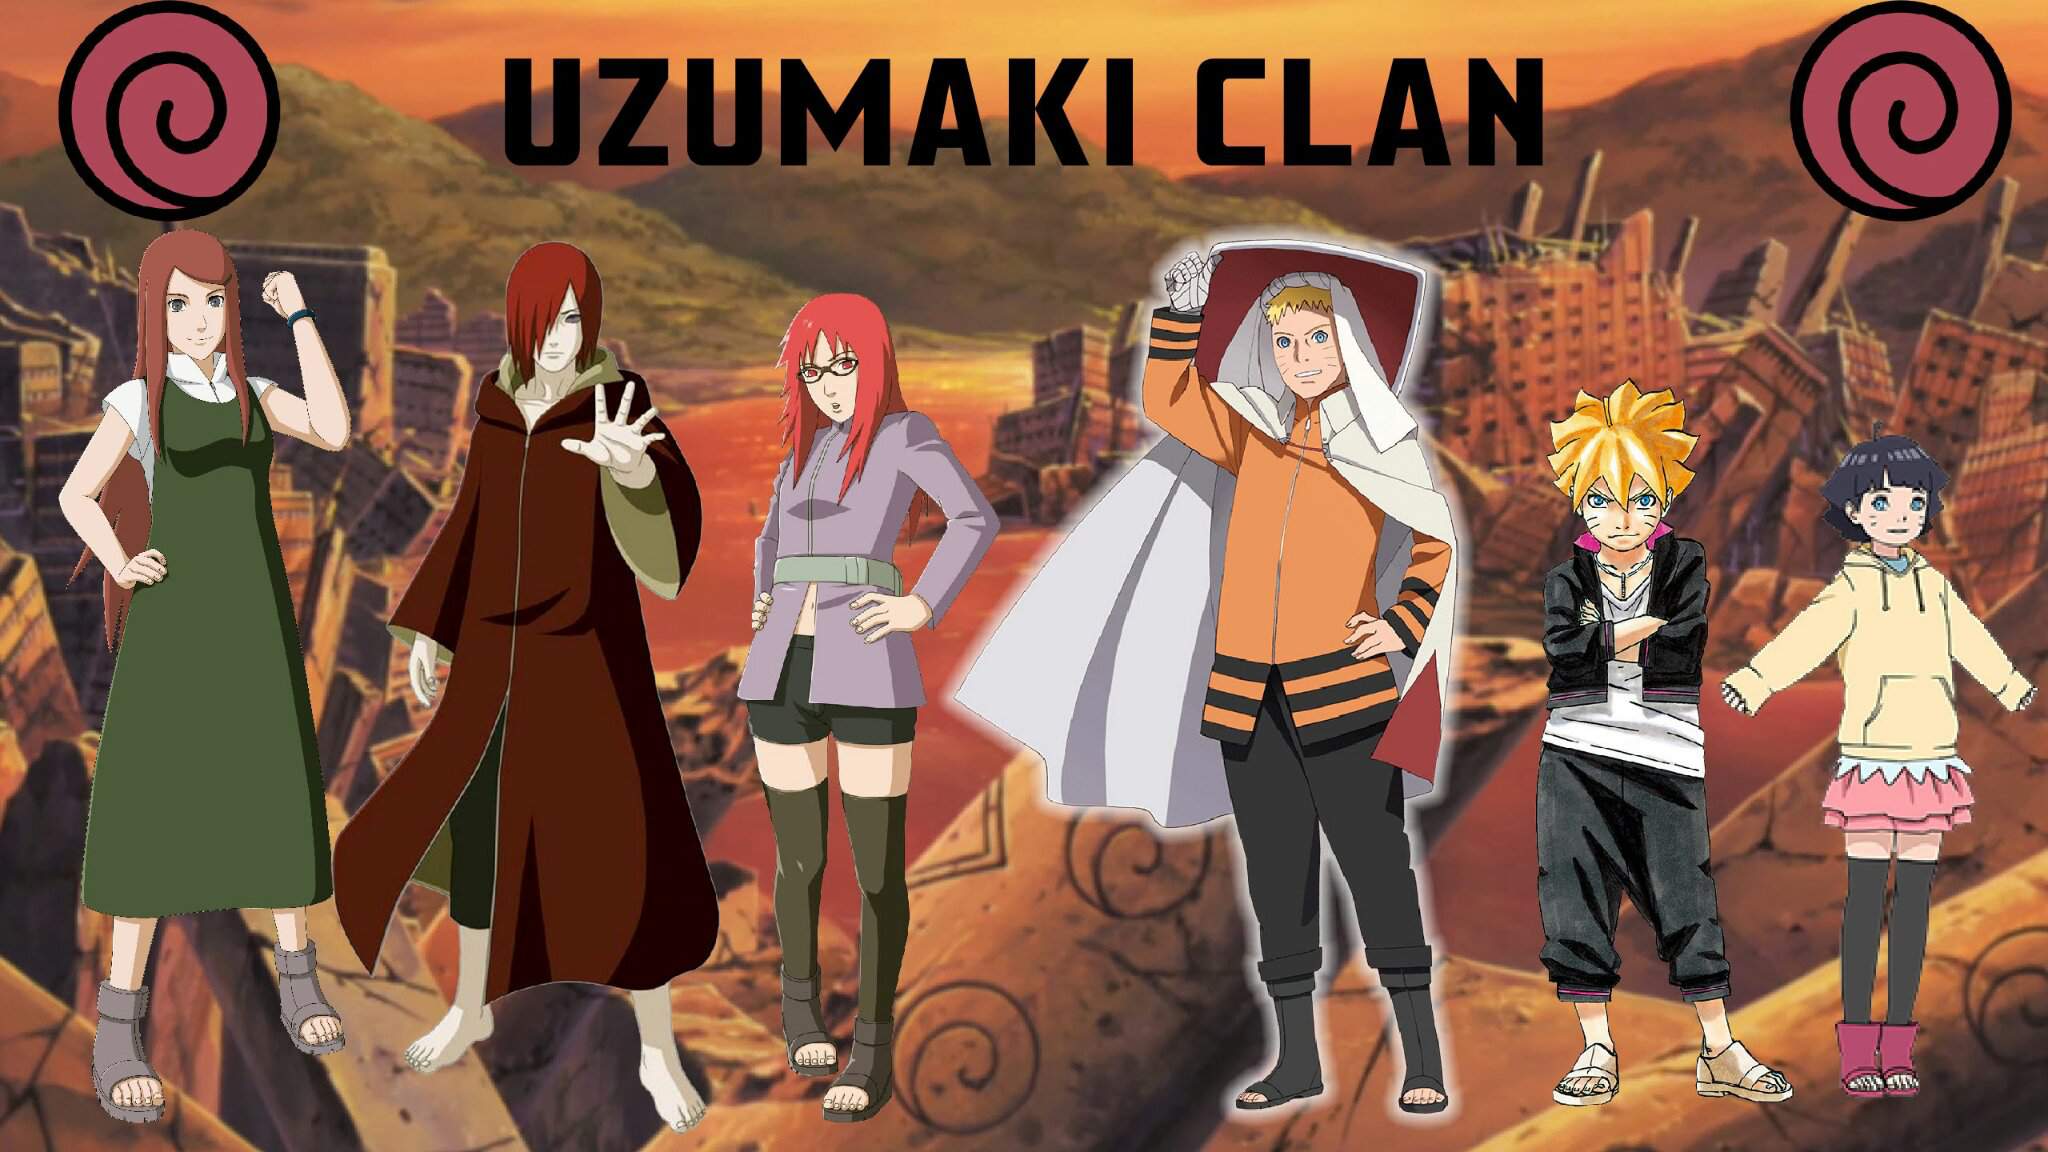 Favourite Character from The Uzumaki clan?